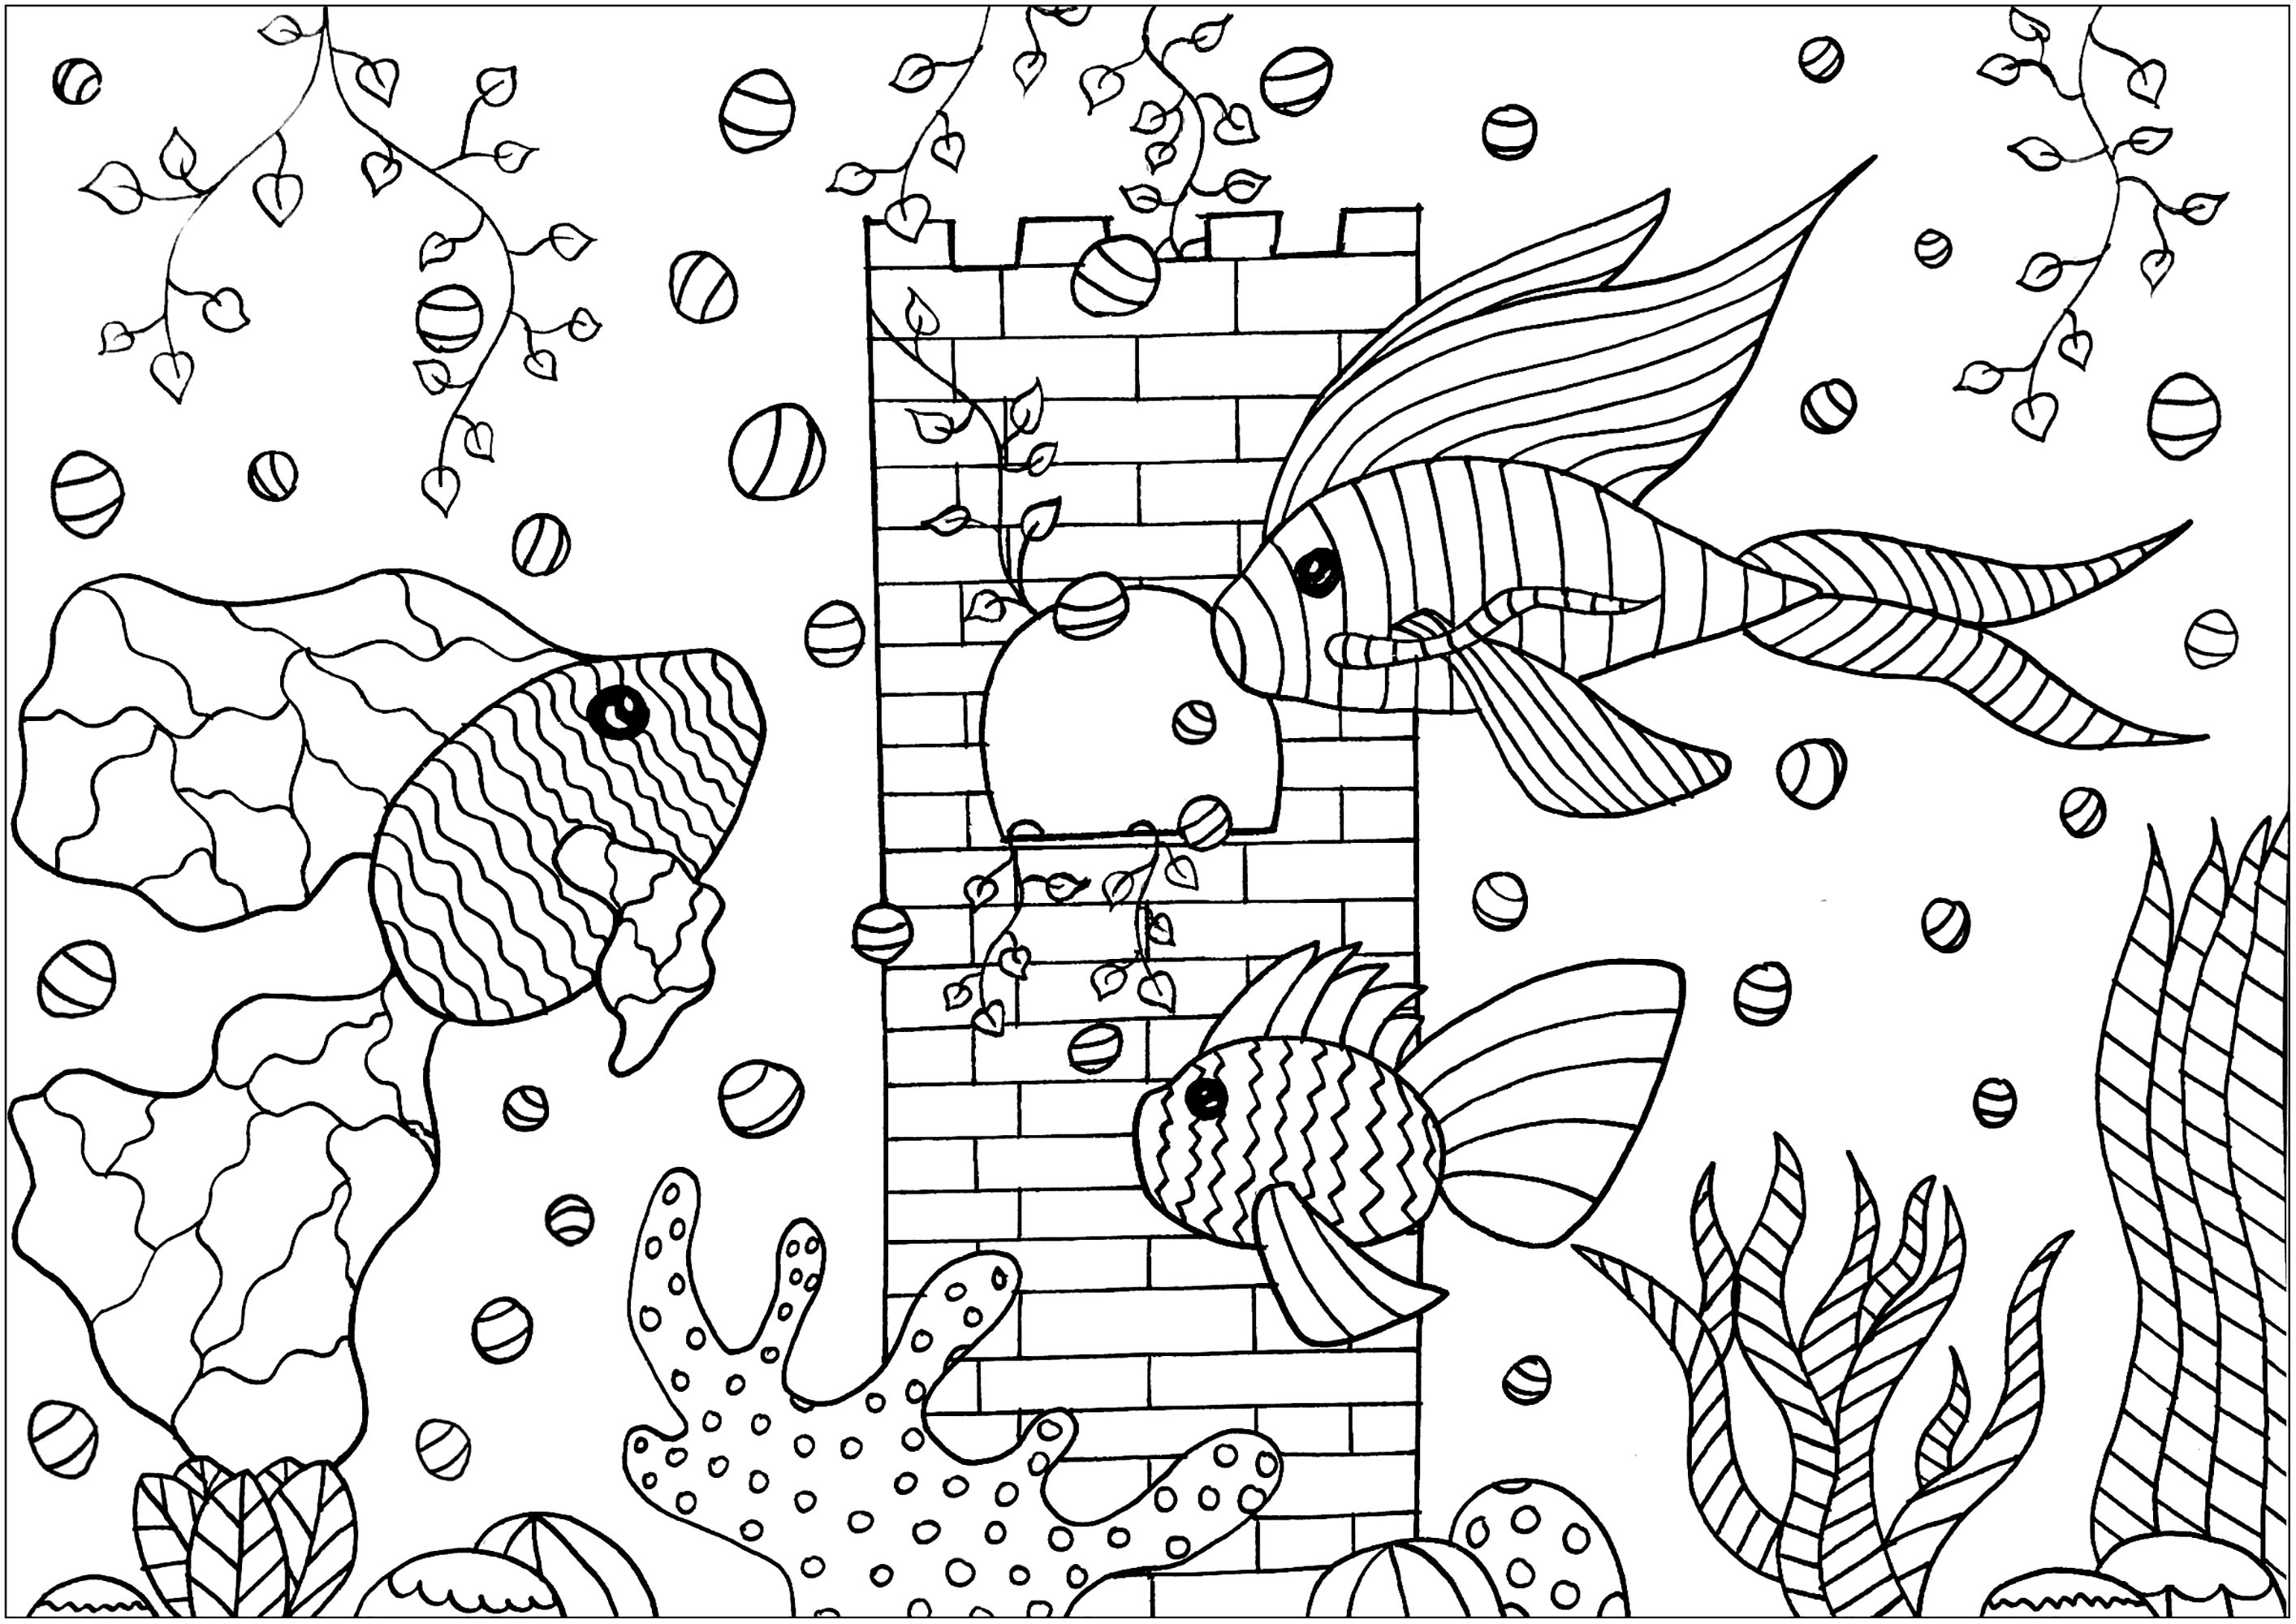 Aquarium Coloring Pages Tree Fishes In A Aquarium Fishes Adult Coloring Pages